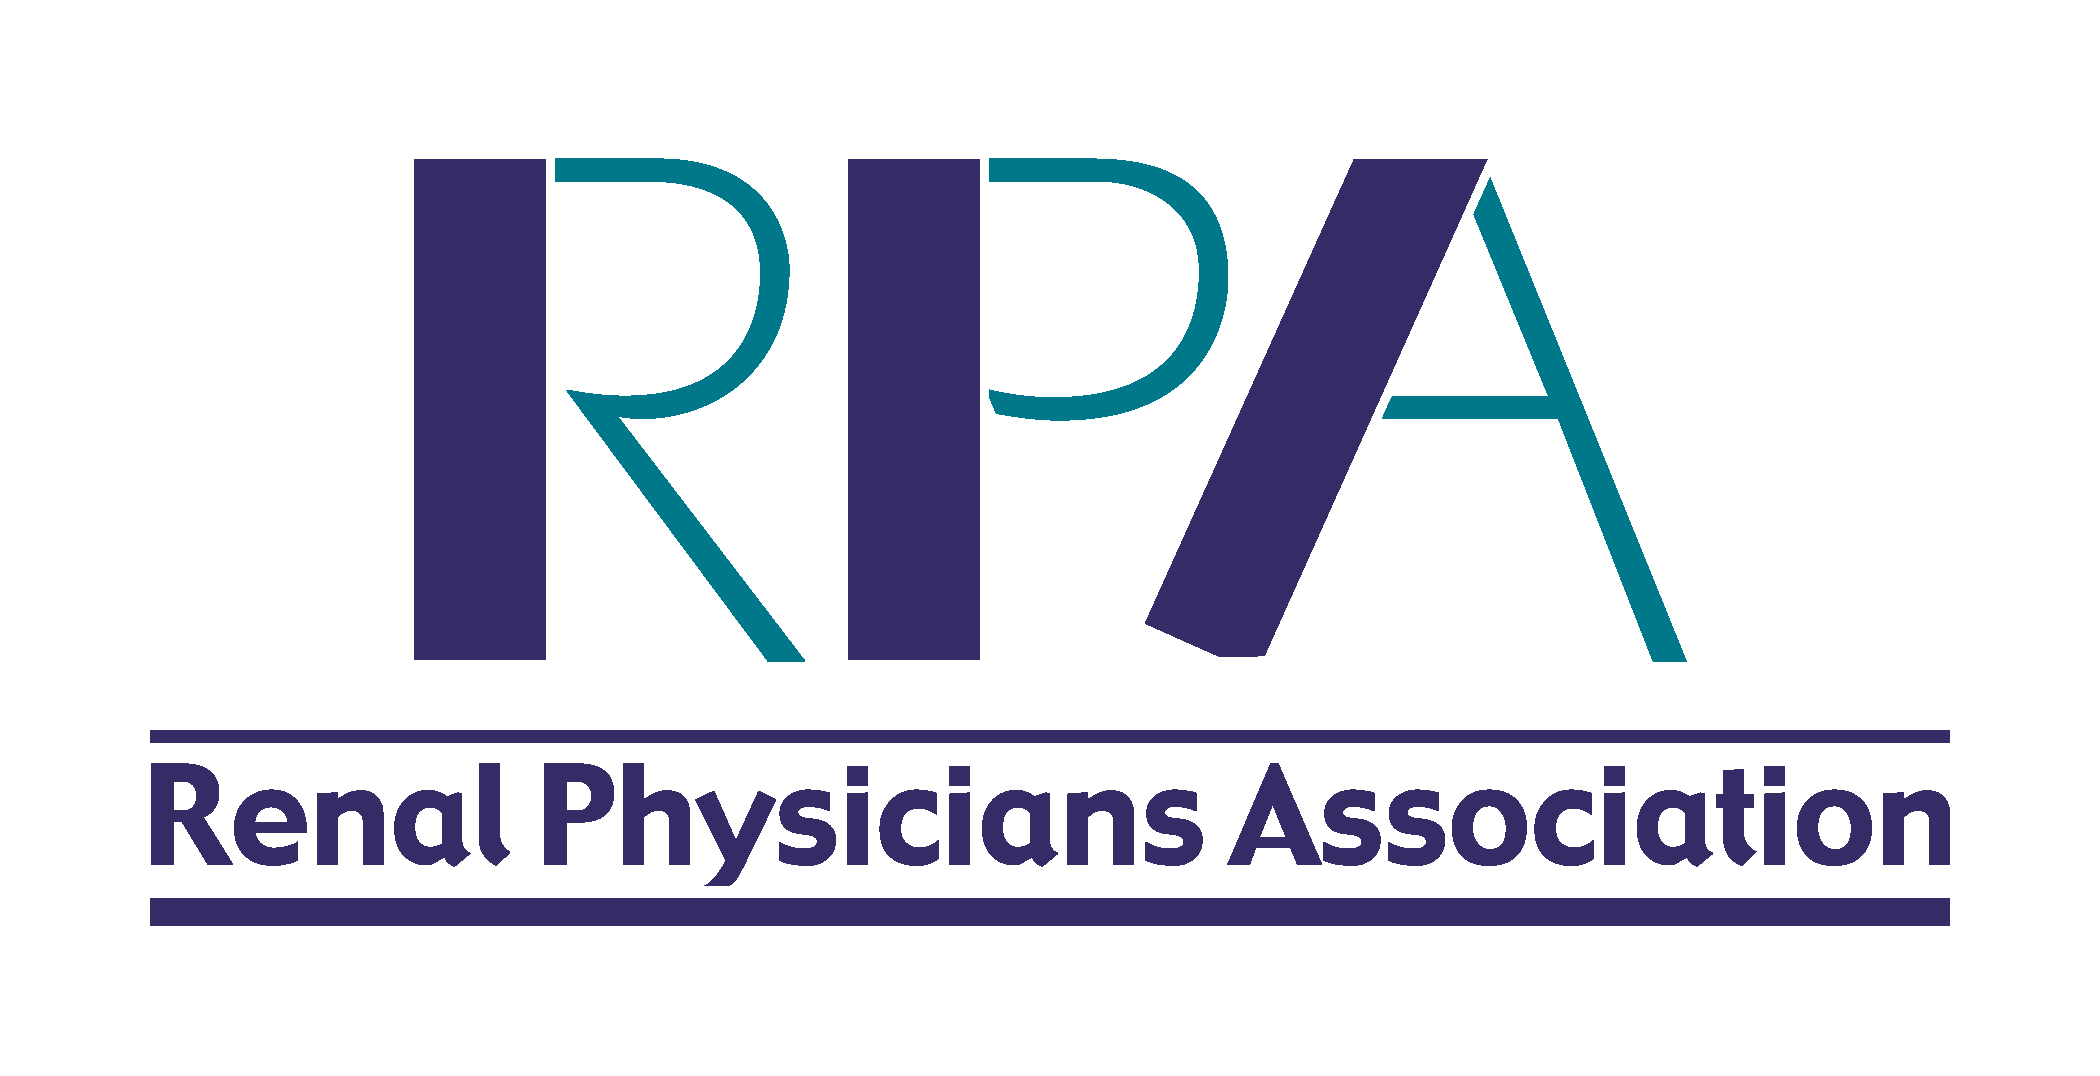 RPA 2019 - The Renal Physicians Association's Annual Meeting